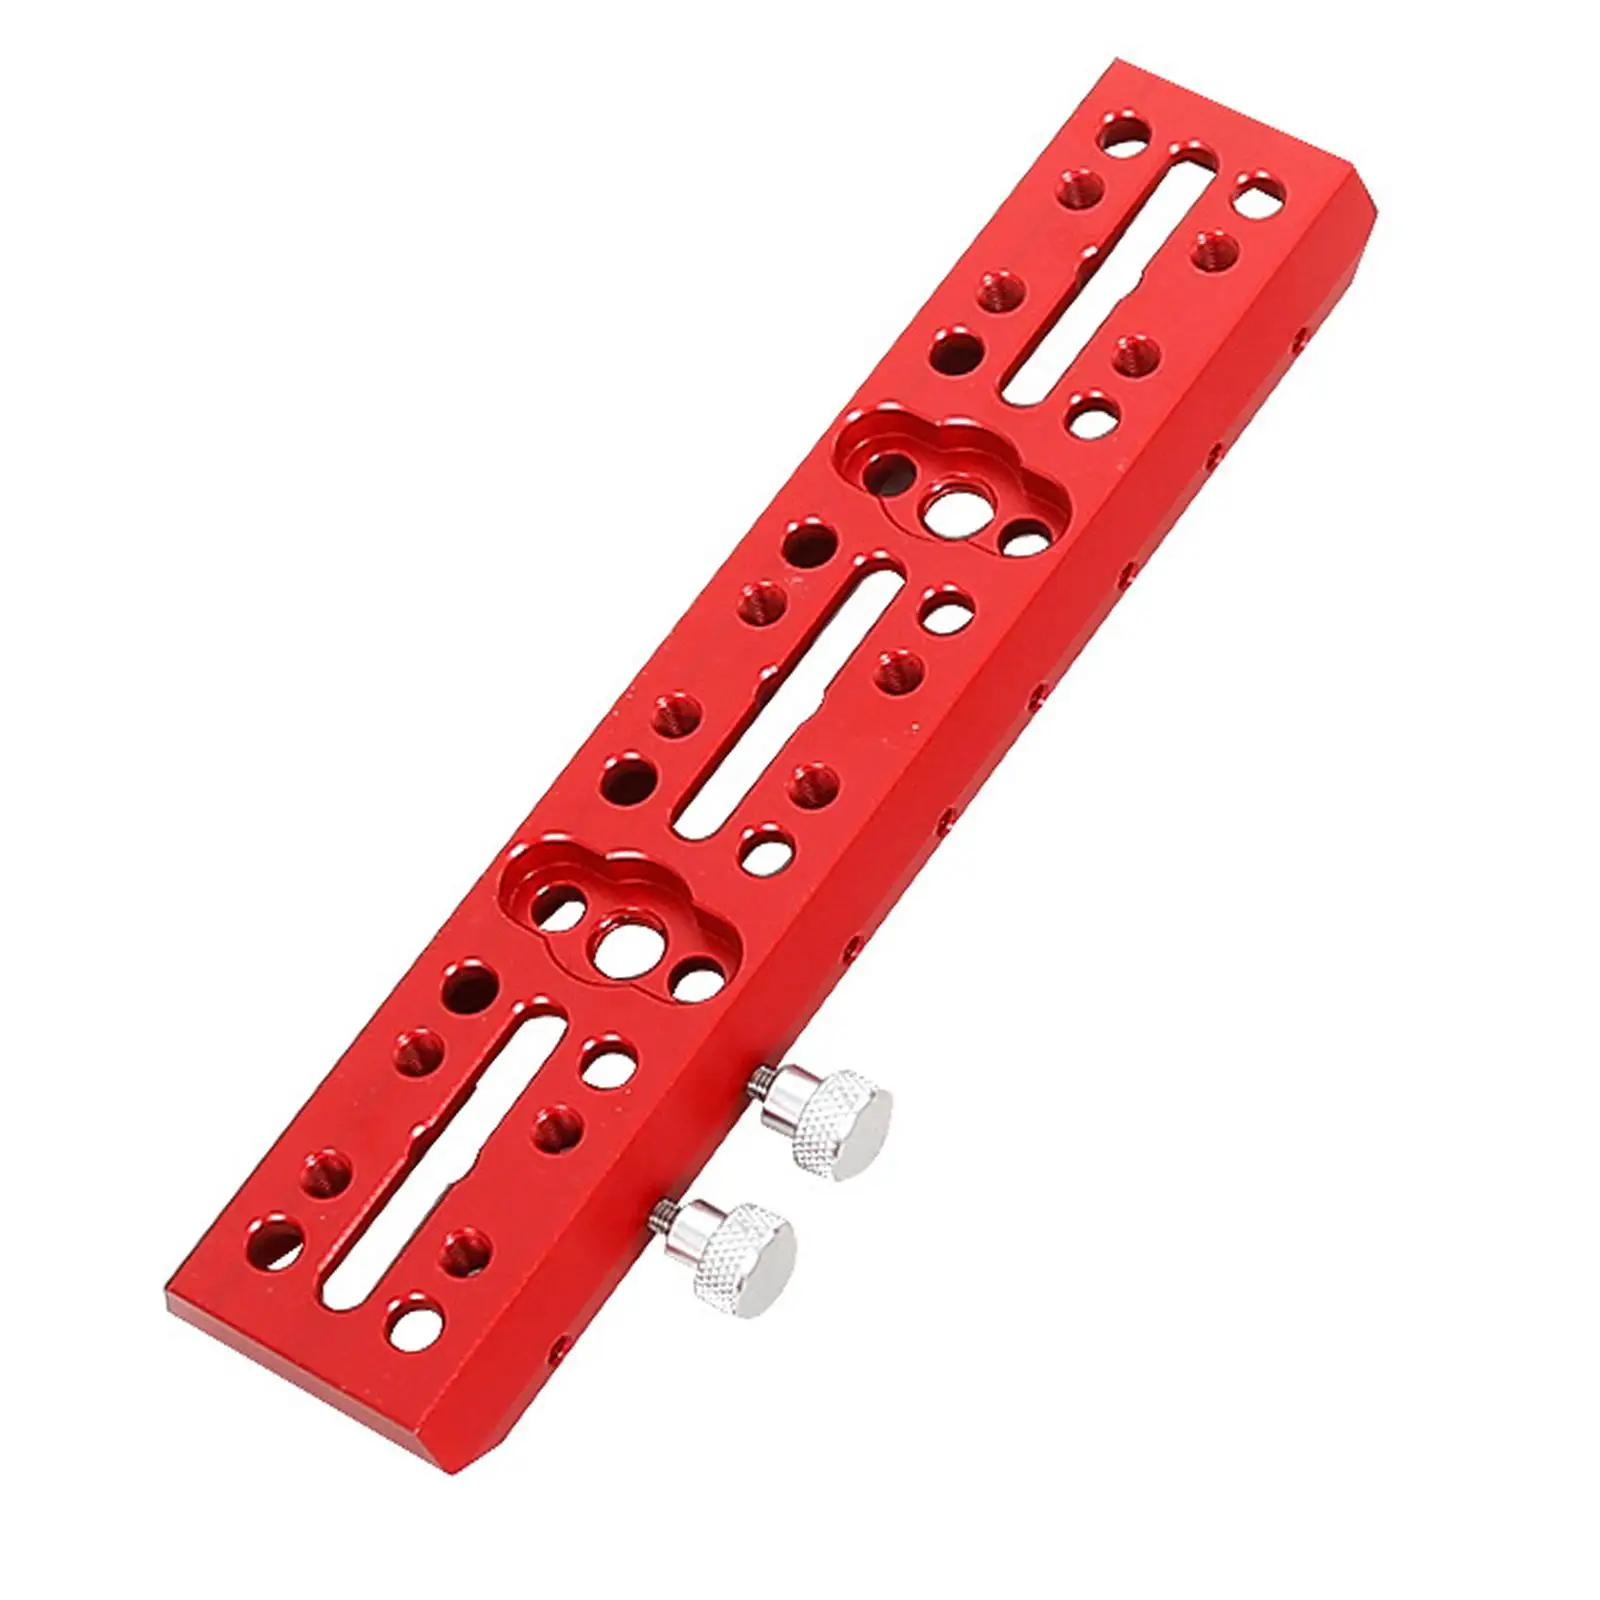 Dovetail Mounting Fixing Plate Standard Dovetail Plate for 2042 Sturdy